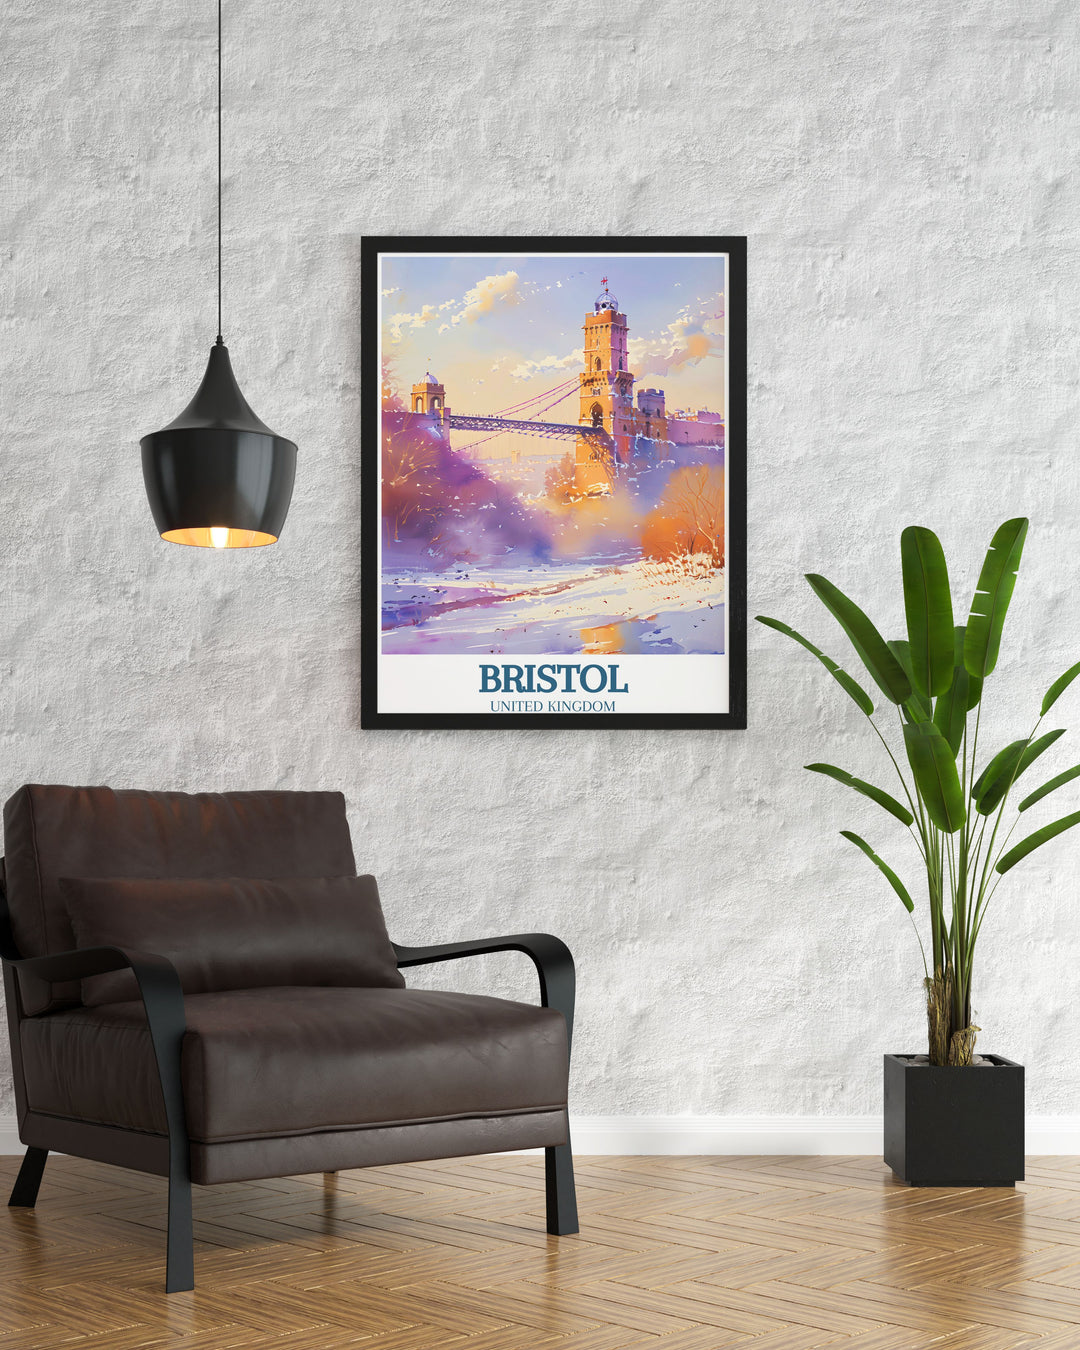 Bristol MTB Poster featuring Ashton Court and the iconic Clifton suspension bridge River Avon. A must have for cycling lovers and those who admire Bristols landmarks. This print is perfect for decorating your living space with a touch of adventure.